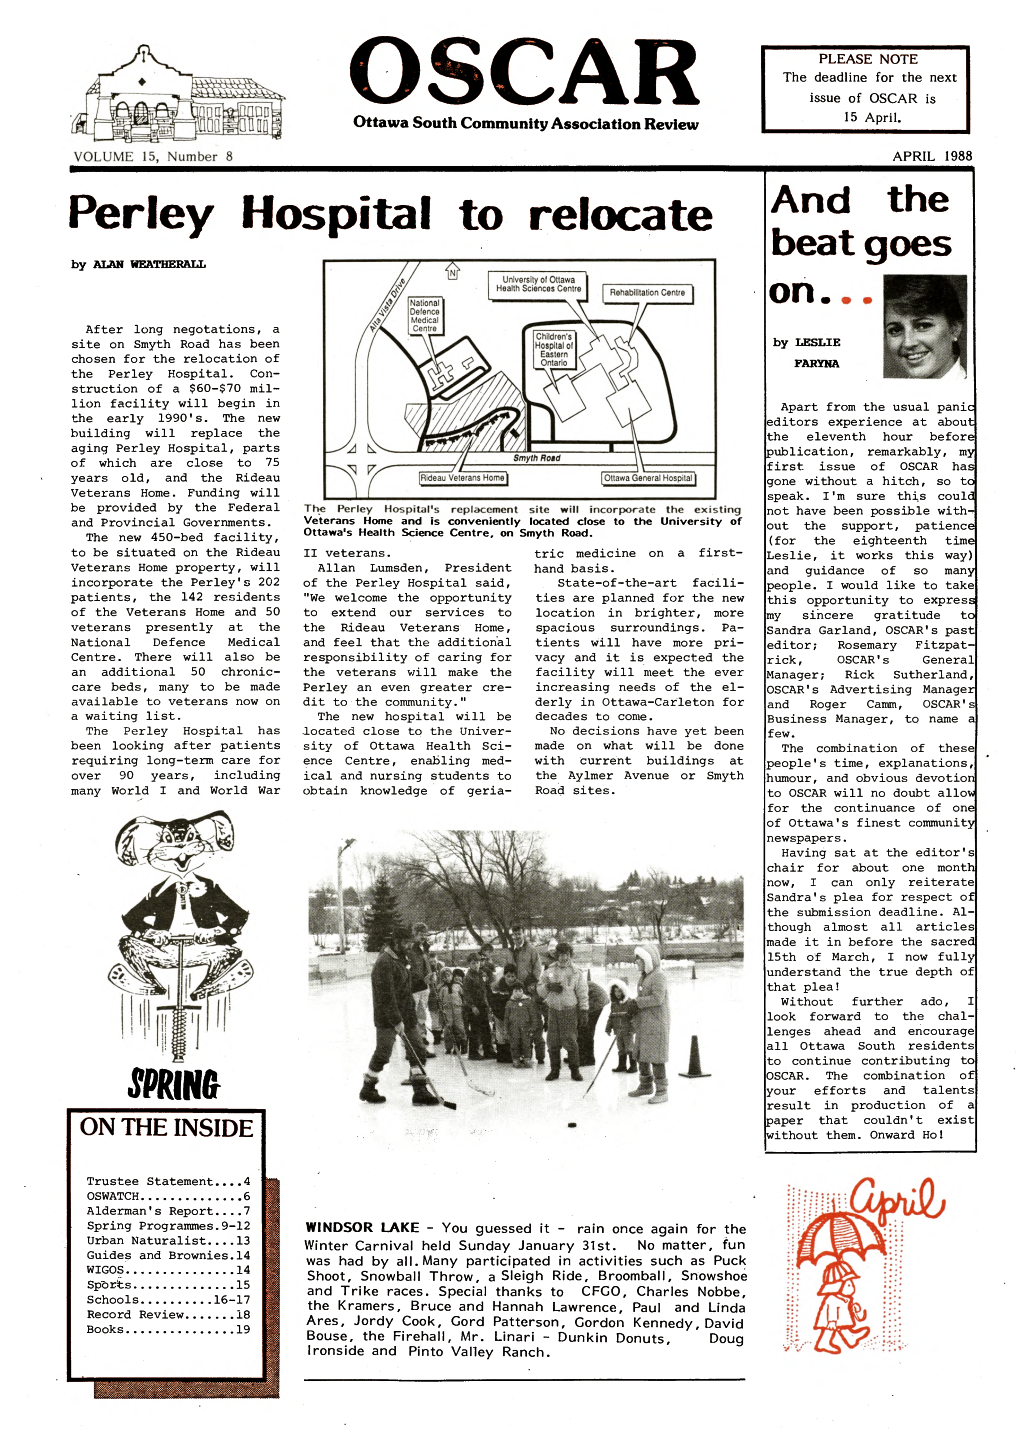 Perley Hospital to Relocate and the Beat Goes by ALAN WEATHERALL On